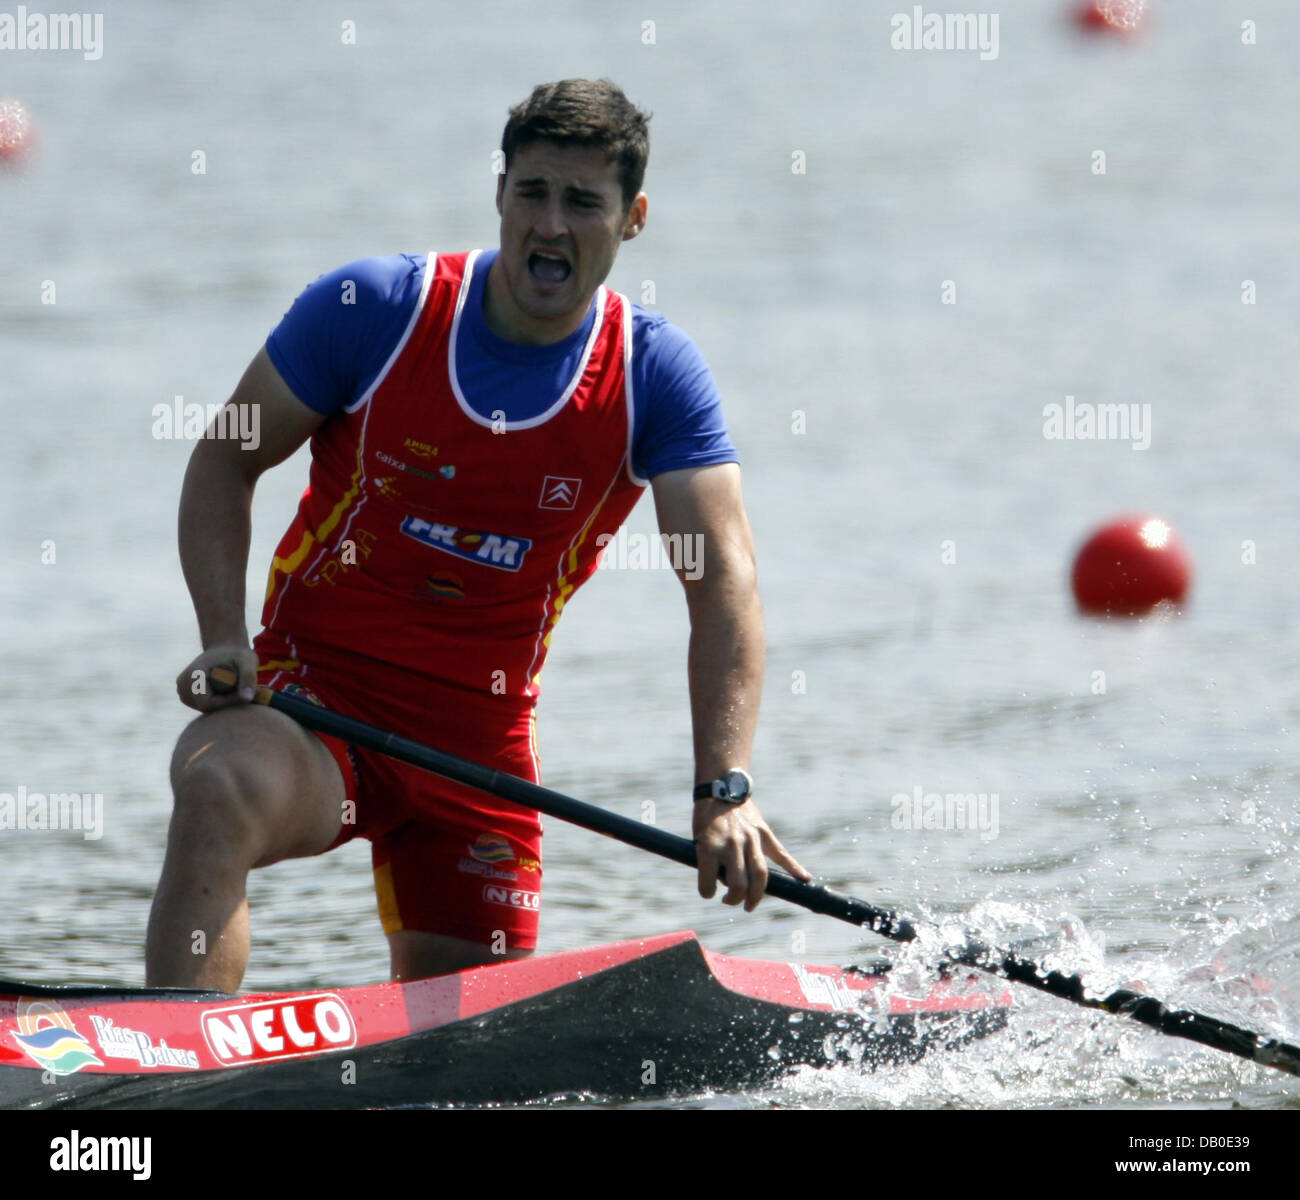 The Spanish Canoeist David Cal Cheers After Grabbing Bronze At The DB0E39 